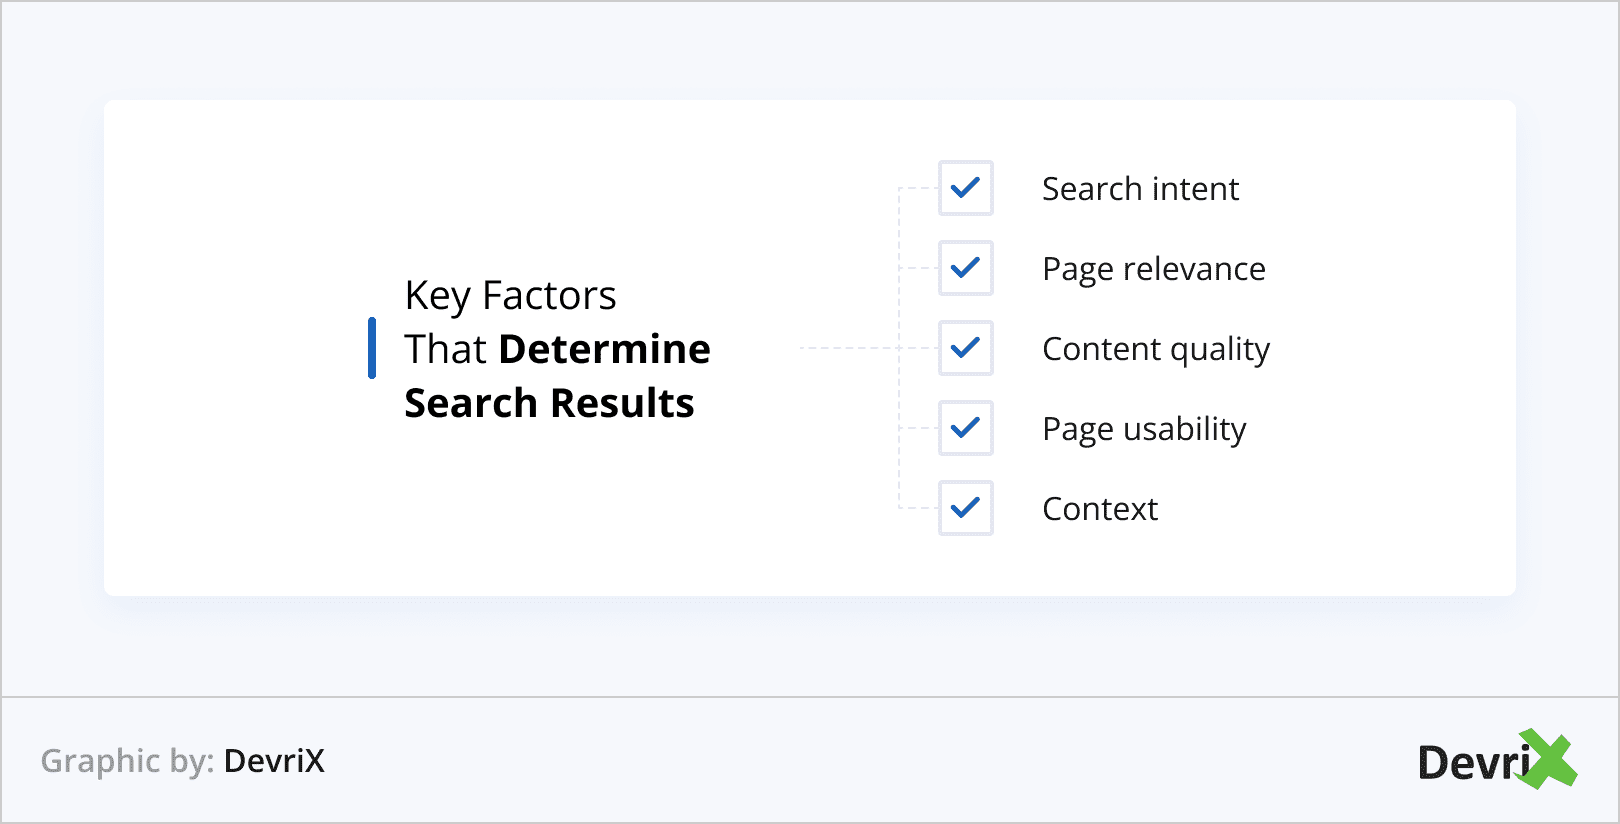 Key Factors That Determine Search Results